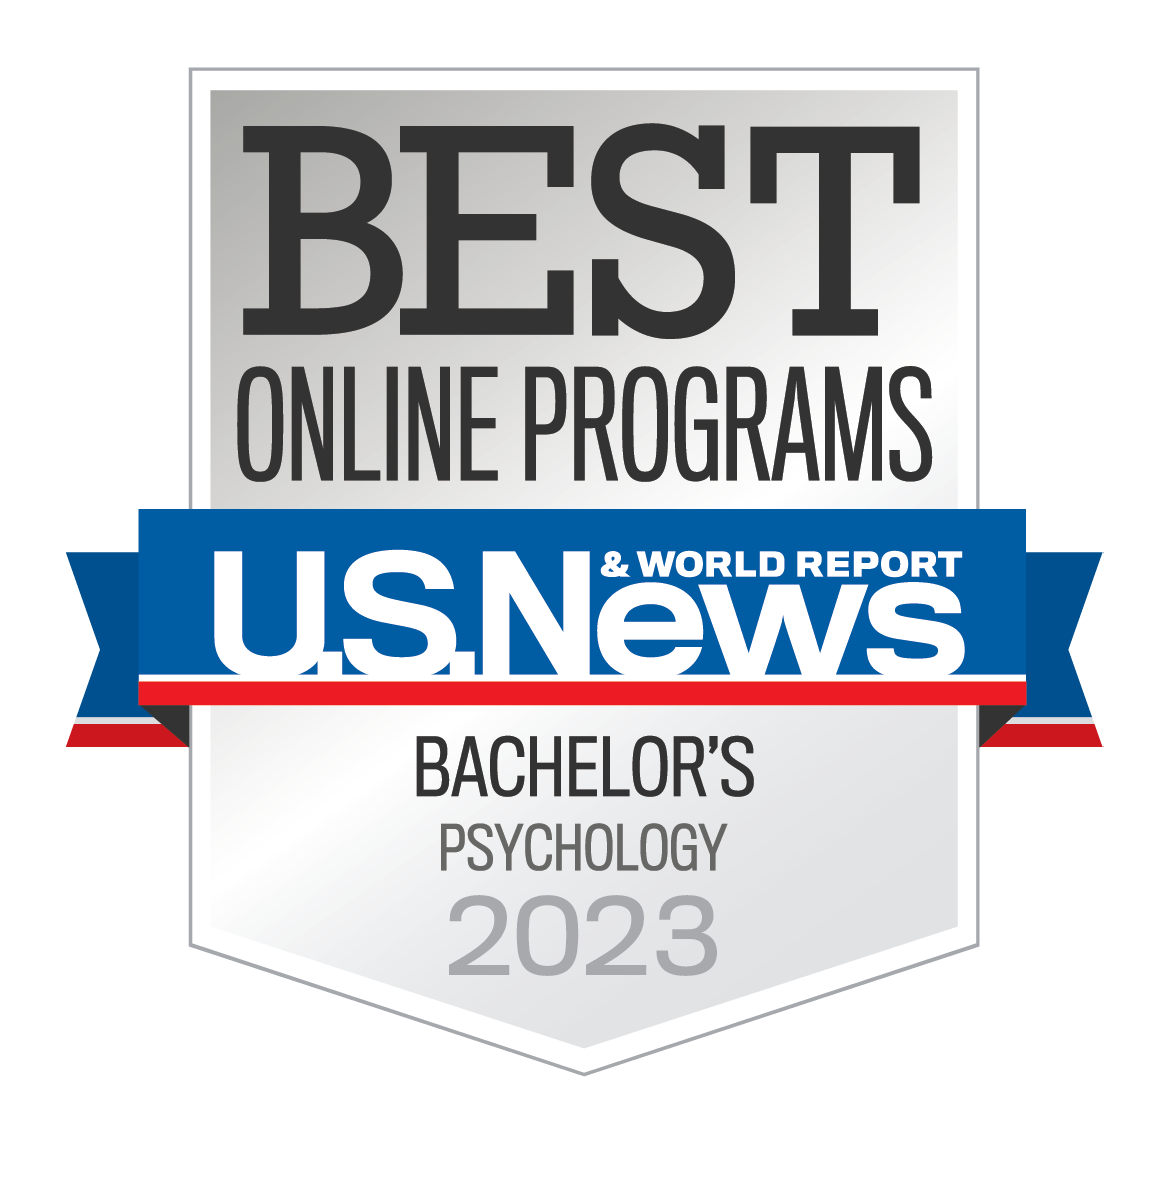 U.S. New and world reports. Best Online Programs: Bachelor's of Psychology 2023